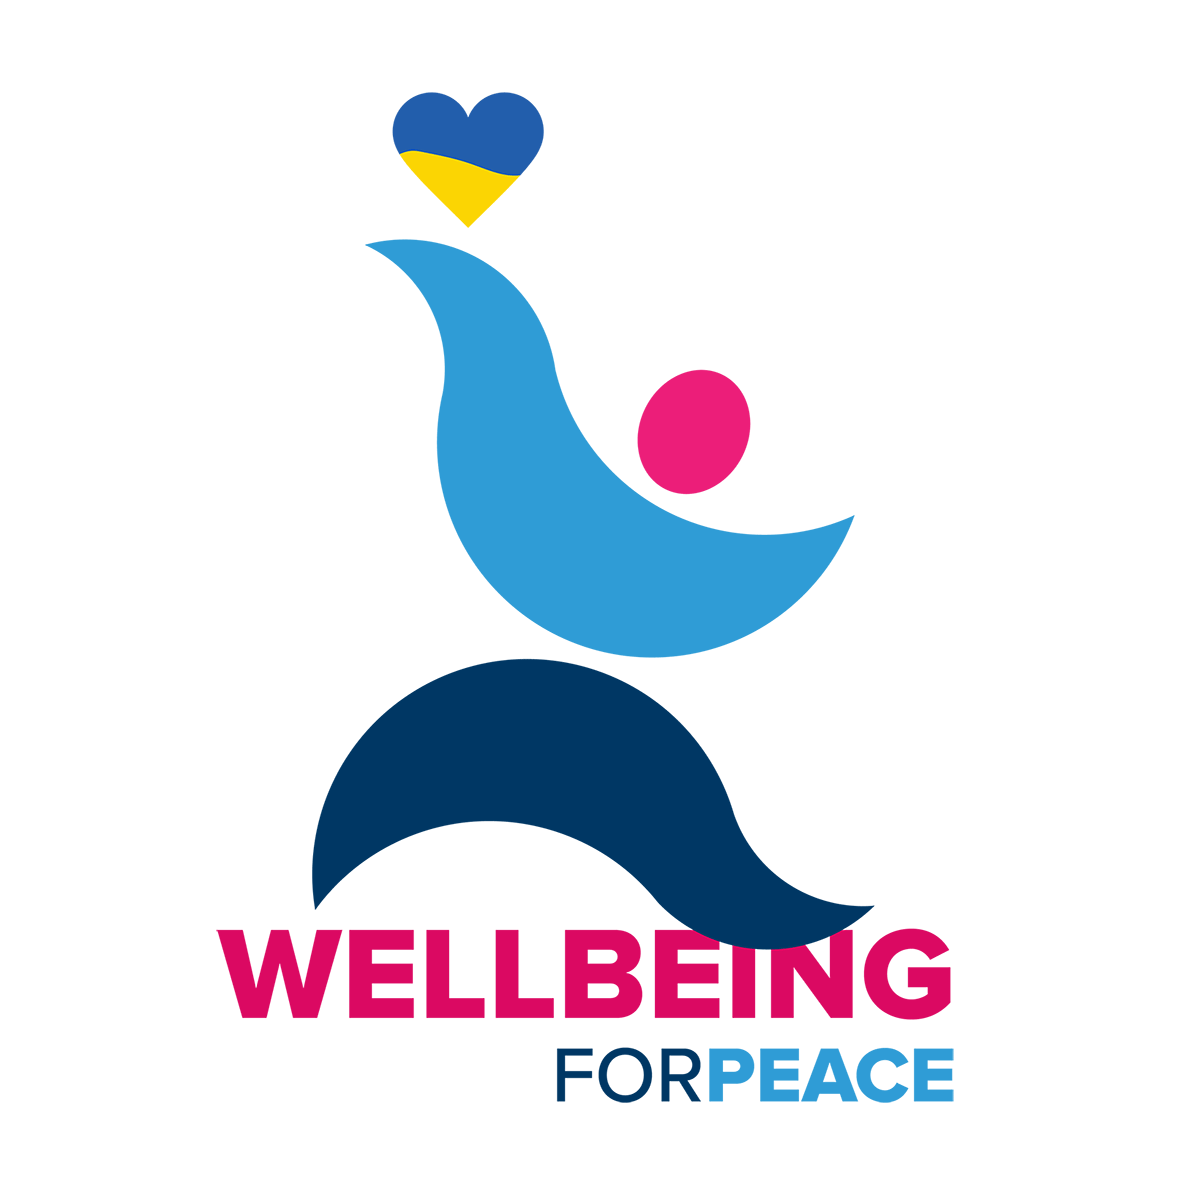 Event Wellbeing for Peace